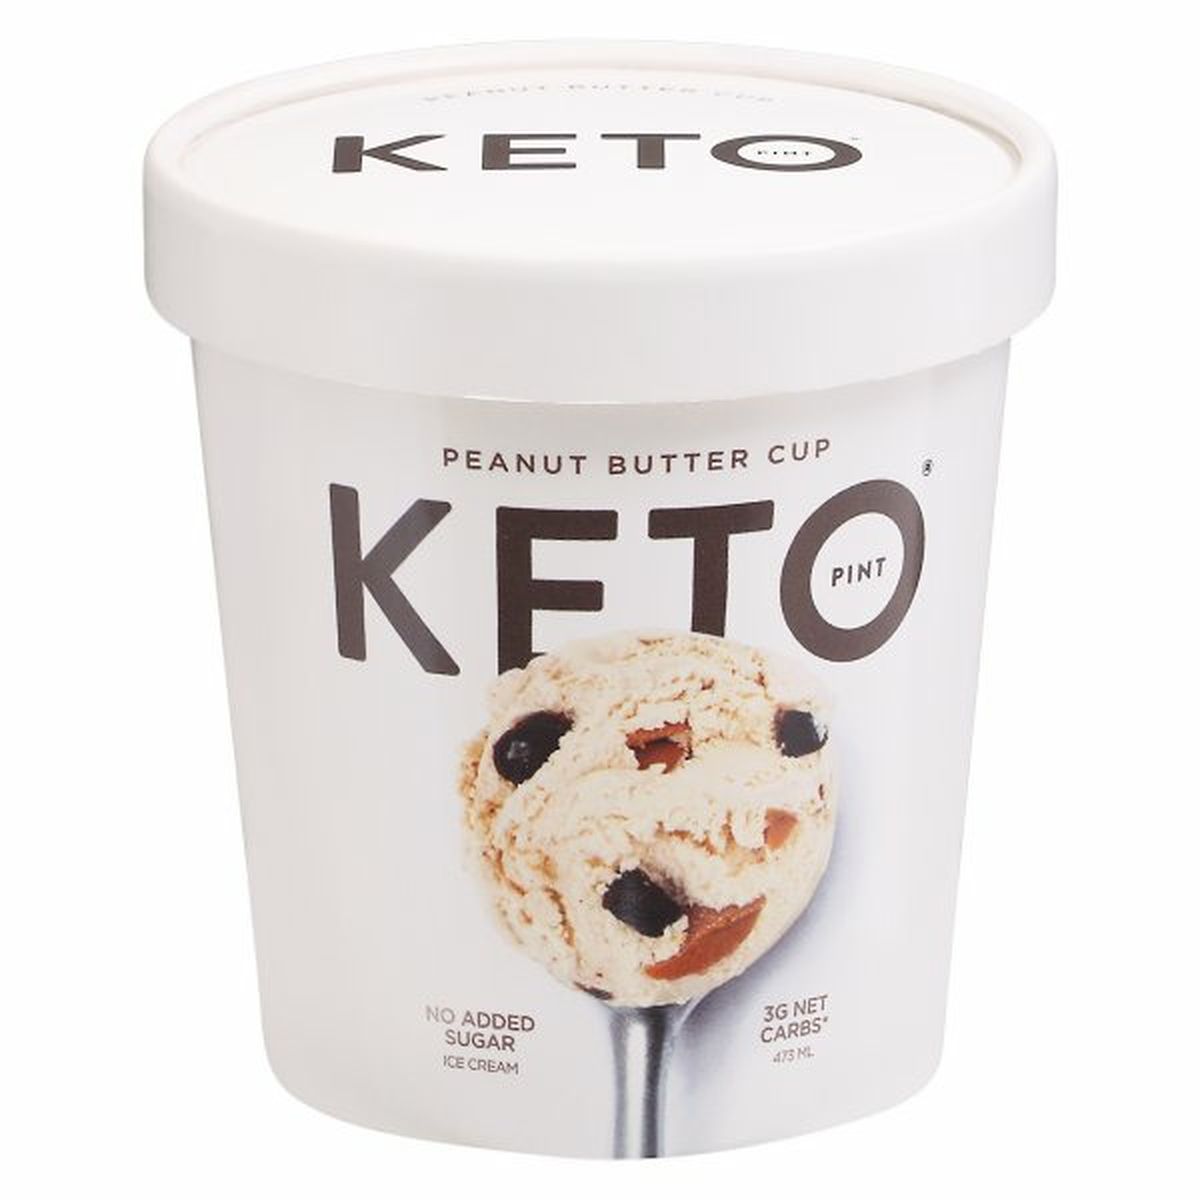 Calories in Keto Pint Ice Cream, Peanut Butter Cup